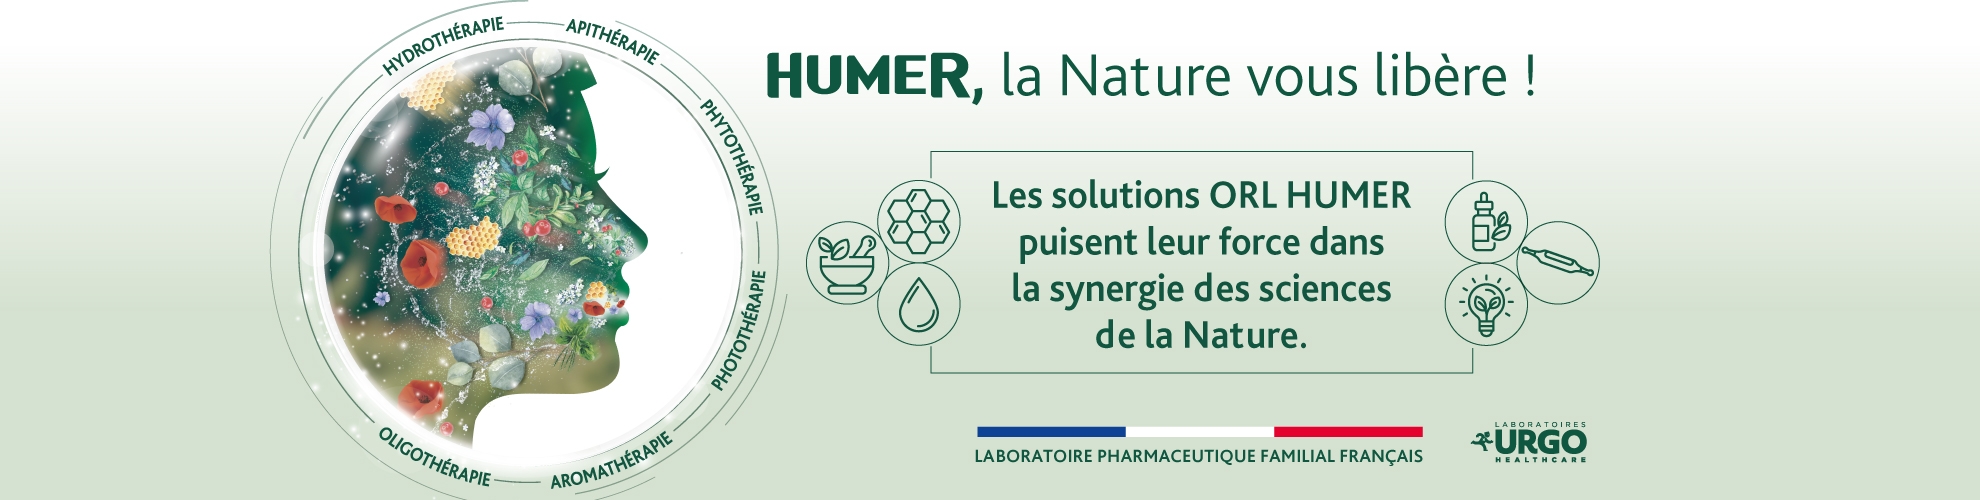 Humer solution ORL